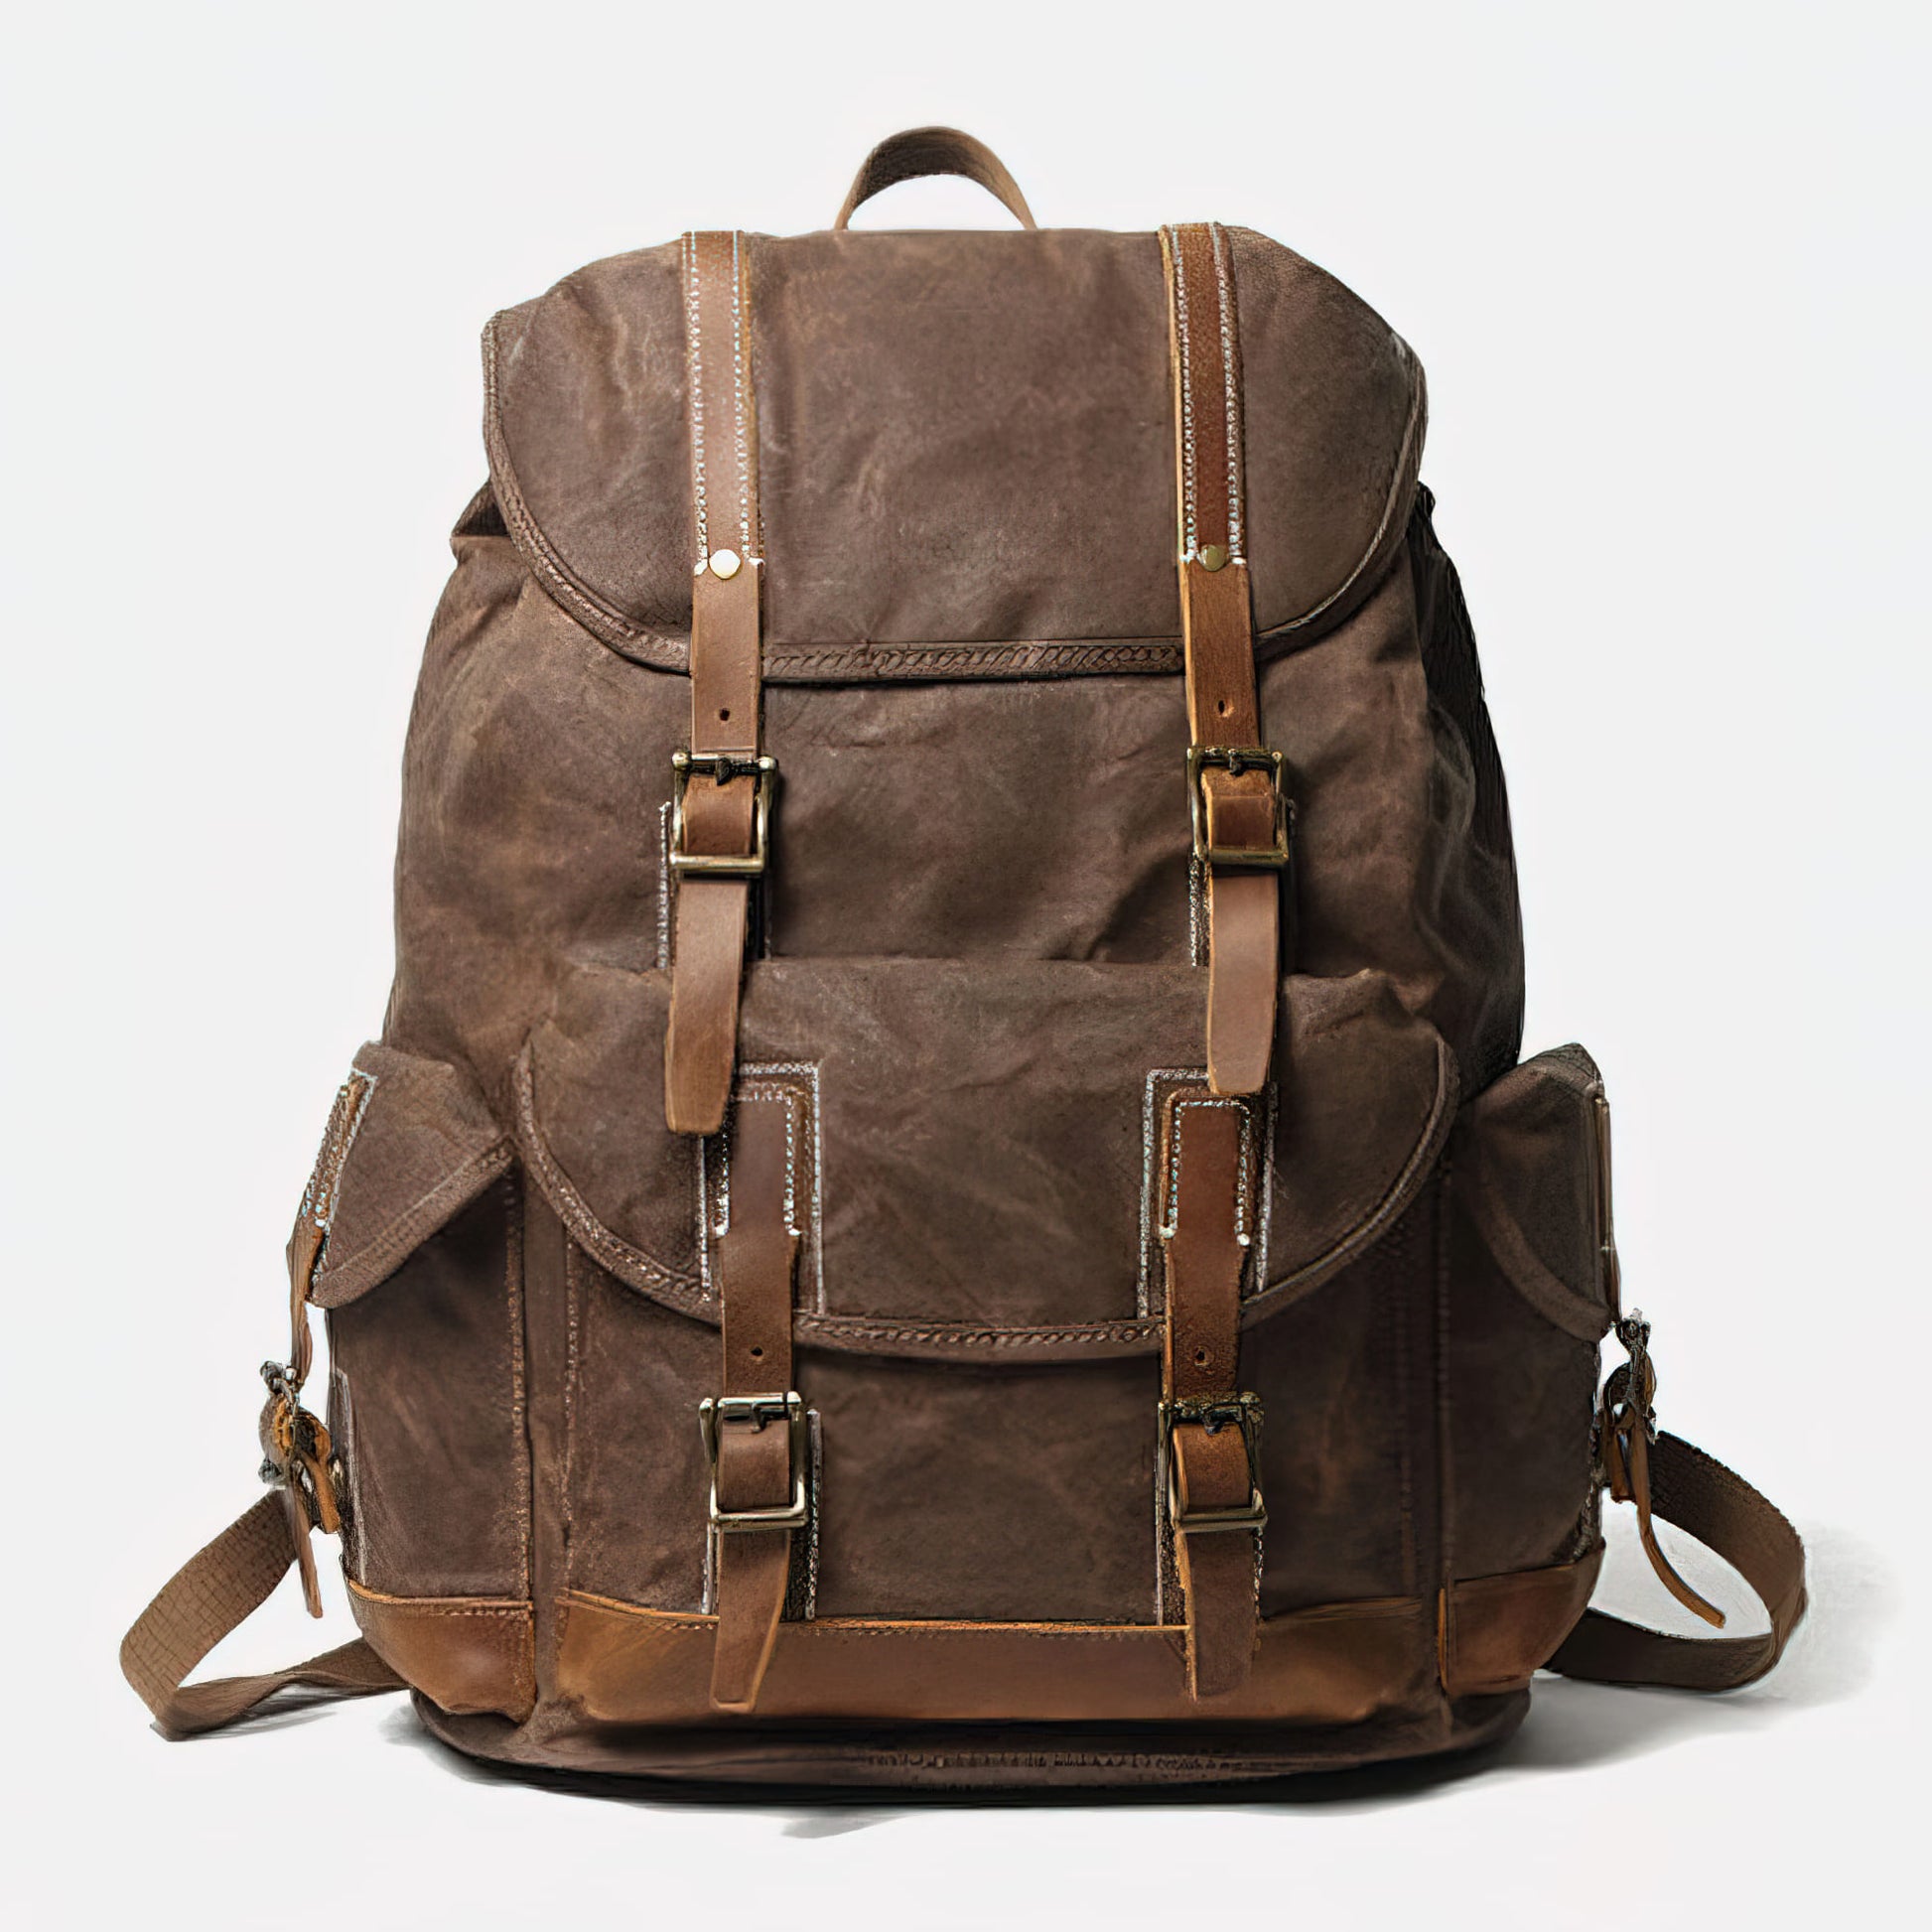 Unisex Premium Rugged Durable Canvas Classic Backpack